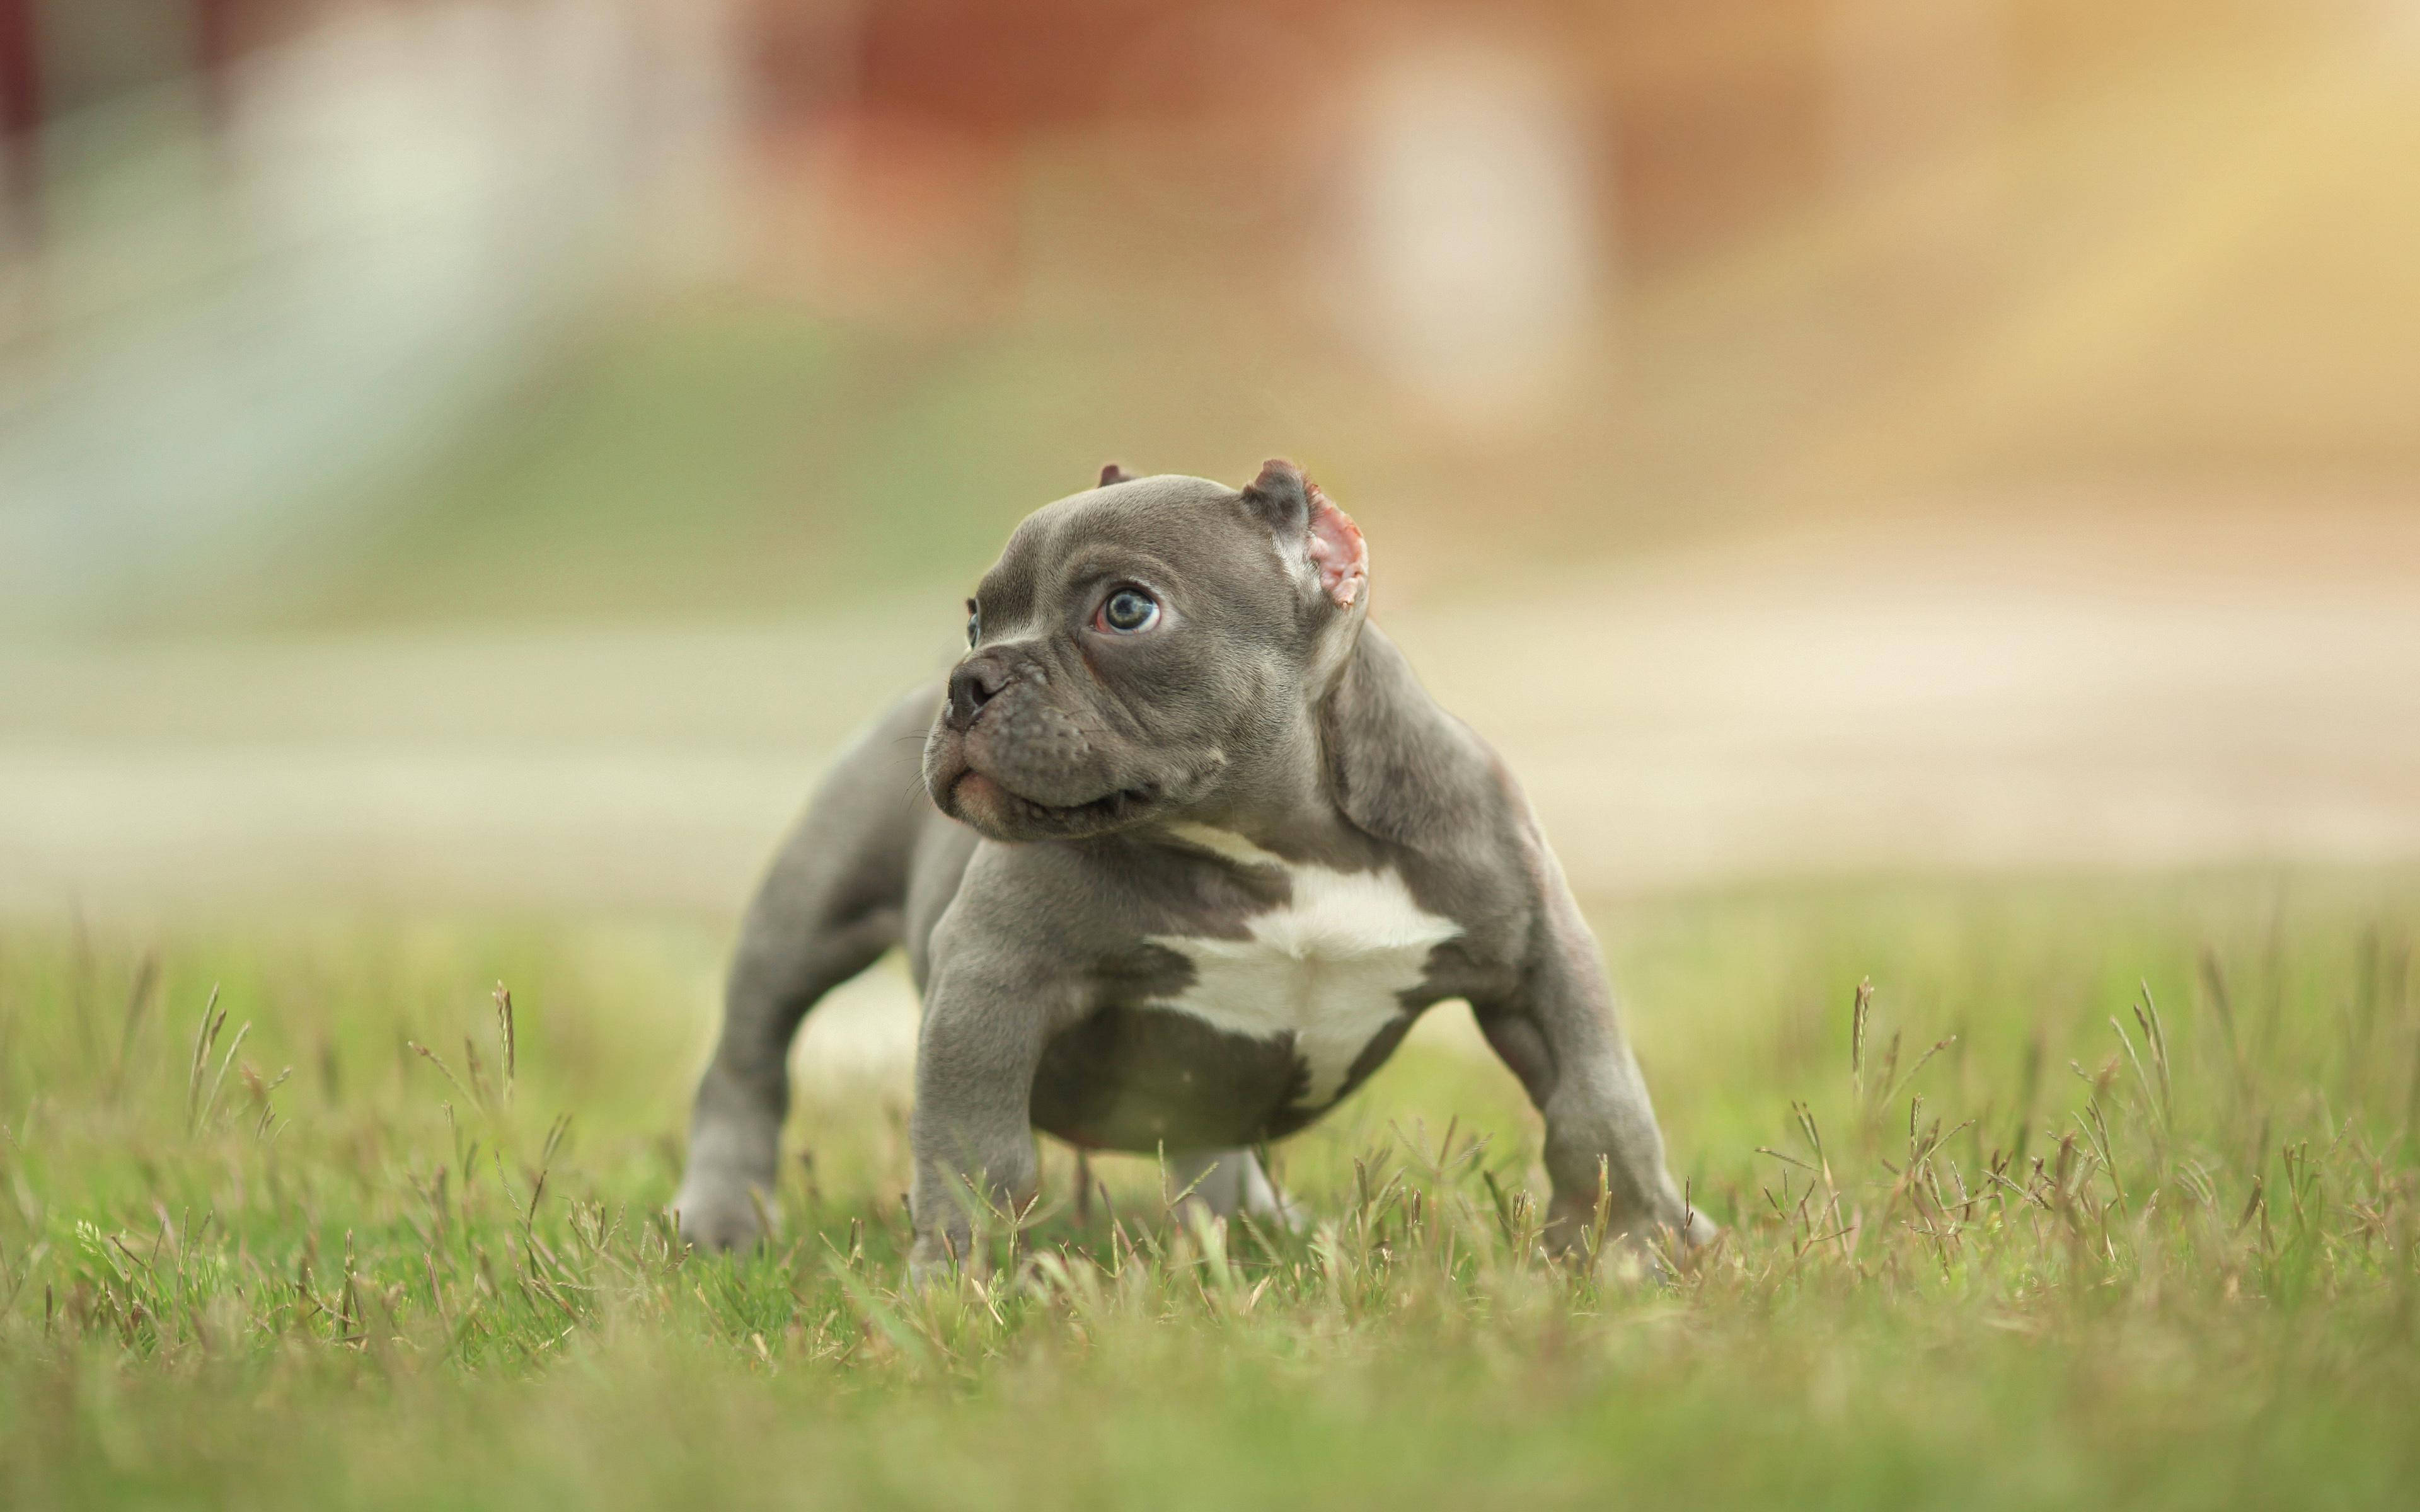 American Bully Puppy Dog On Grass Background